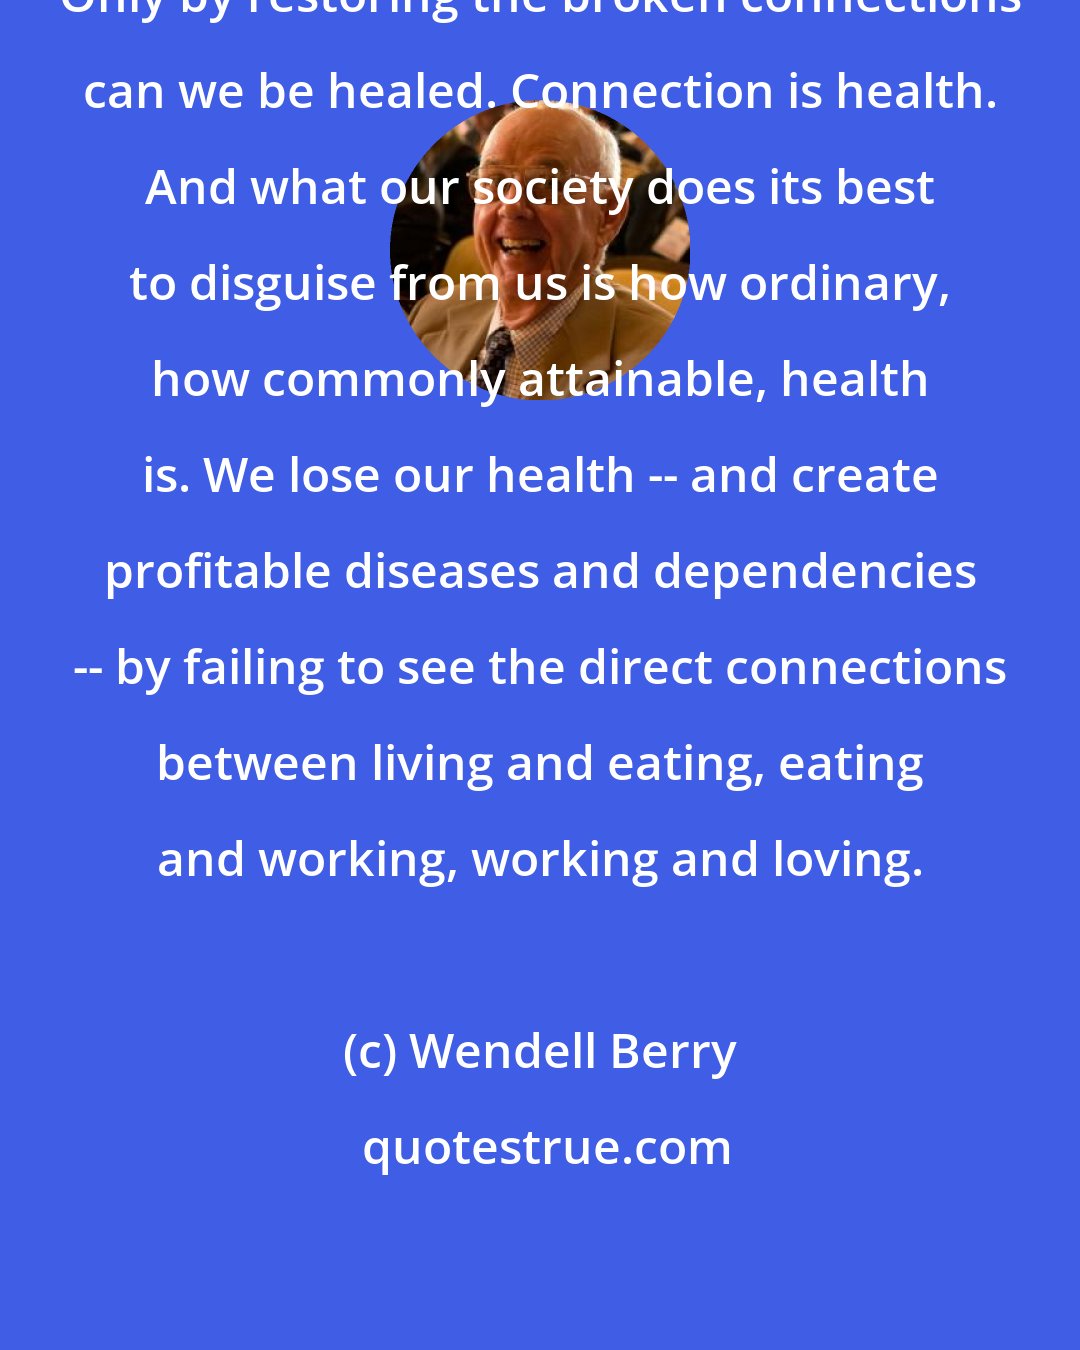 Wendell Berry: Only by restoring the broken connections can we be healed. Connection is health. And what our society does its best to disguise from us is how ordinary, how commonly attainable, health is. We lose our health -- and create profitable diseases and dependencies -- by failing to see the direct connections between living and eating, eating and working, working and loving.